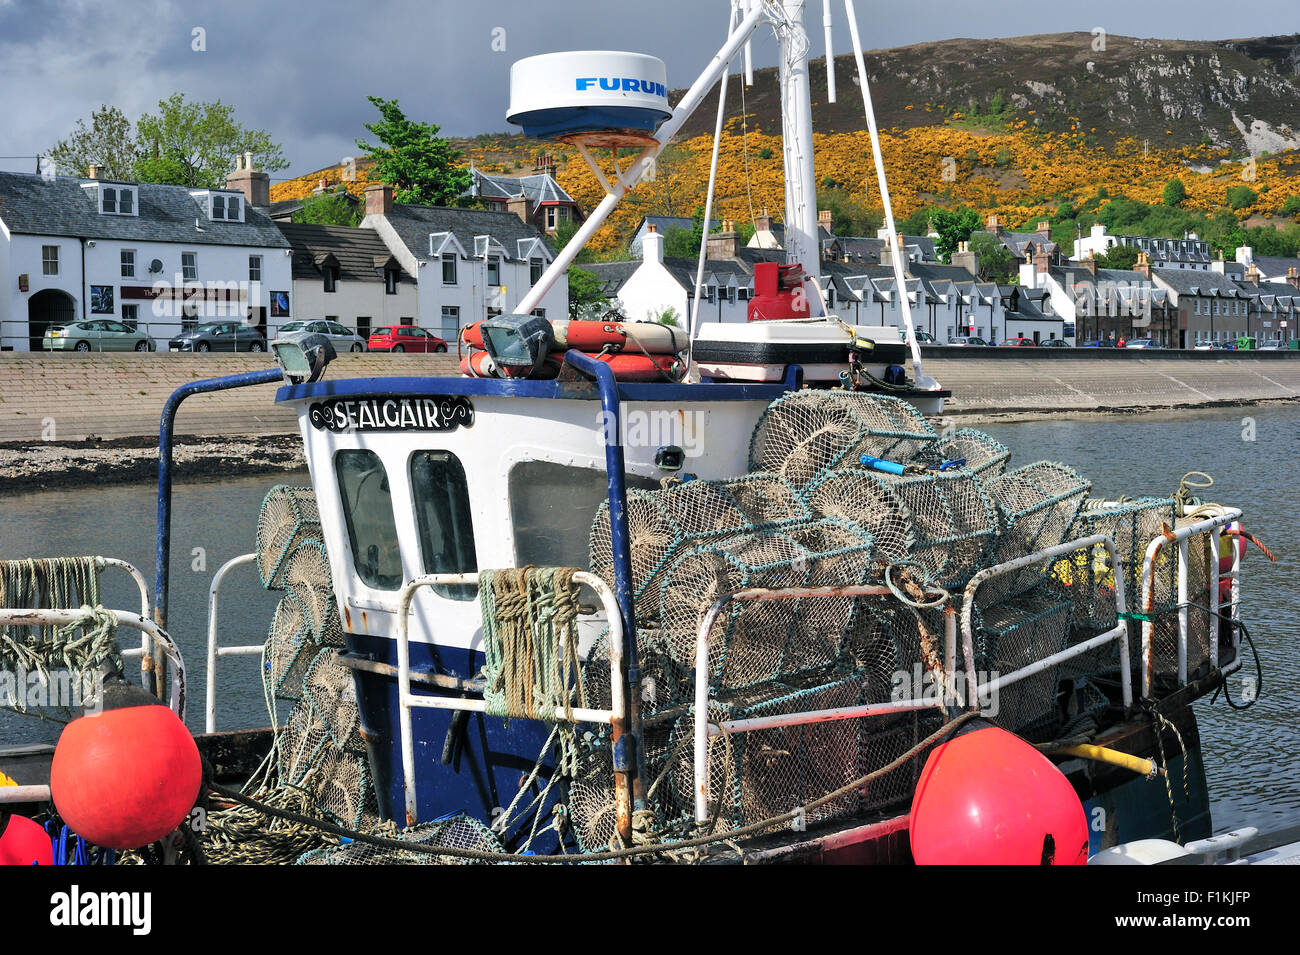 Fishing boat loaded with lobster creels / traps in the Ullapool harbour, Ross and Cromarty, Scottish Highlands, Scotland, UK Stock Photo